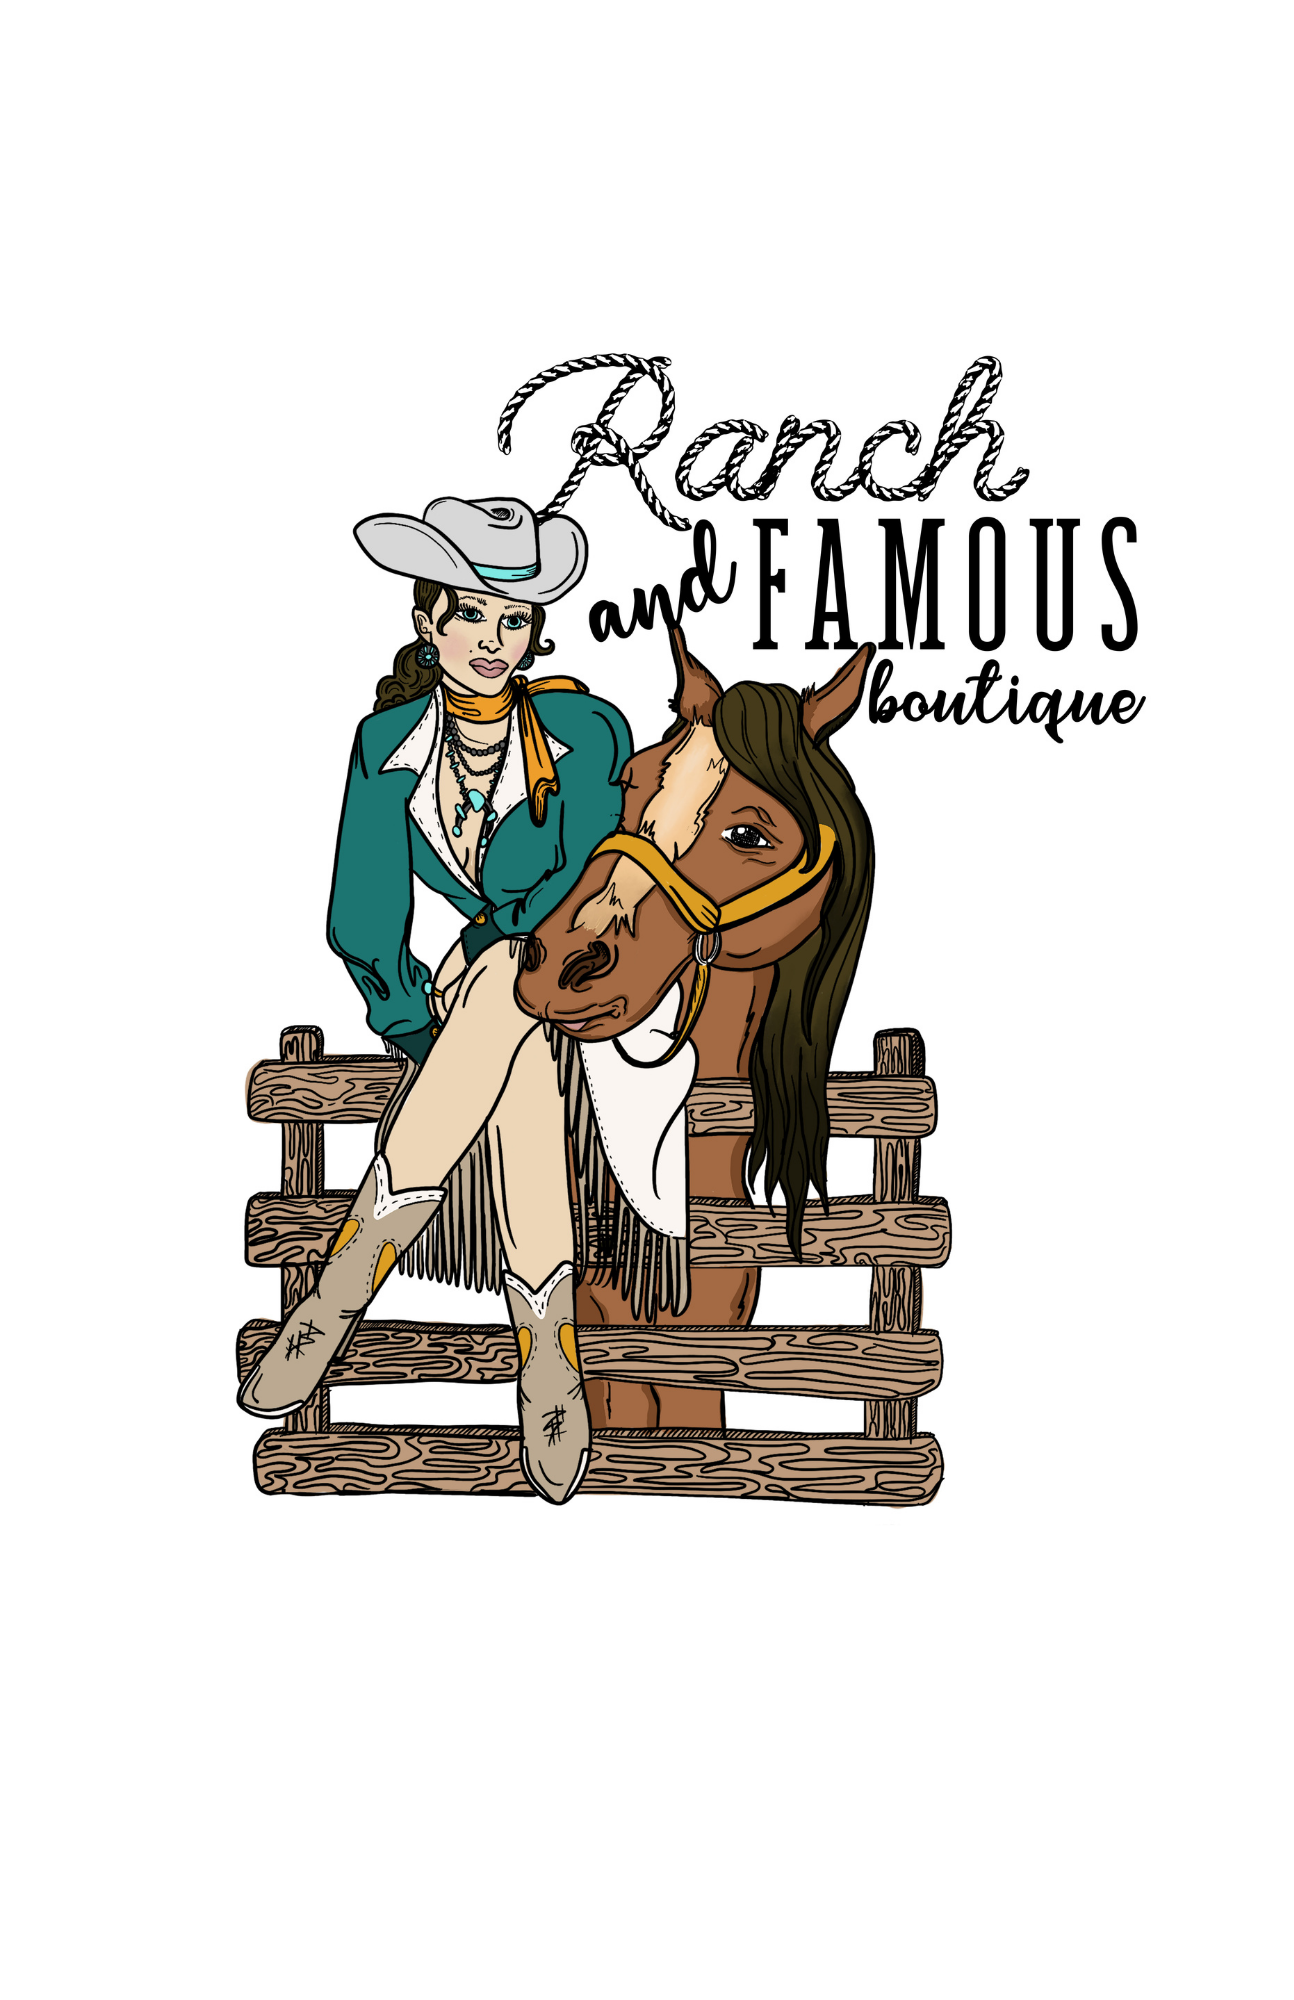 Seminole Sequin Pants – Ranch and Famous